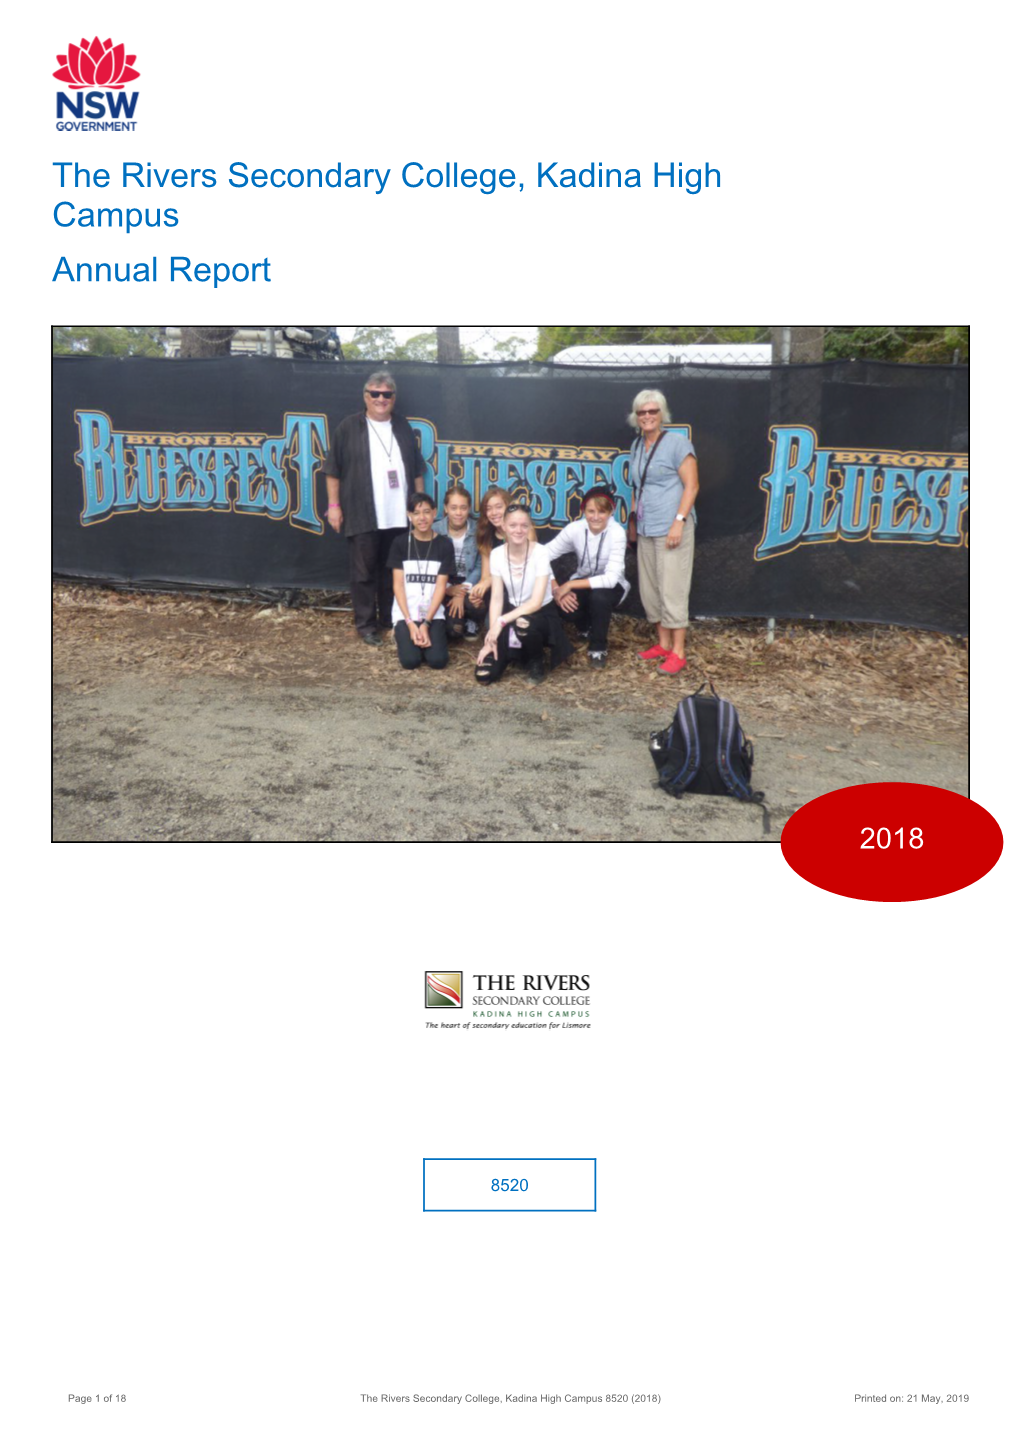 2018 the Rivers Secondary College, Kadina High Campus Annual Report